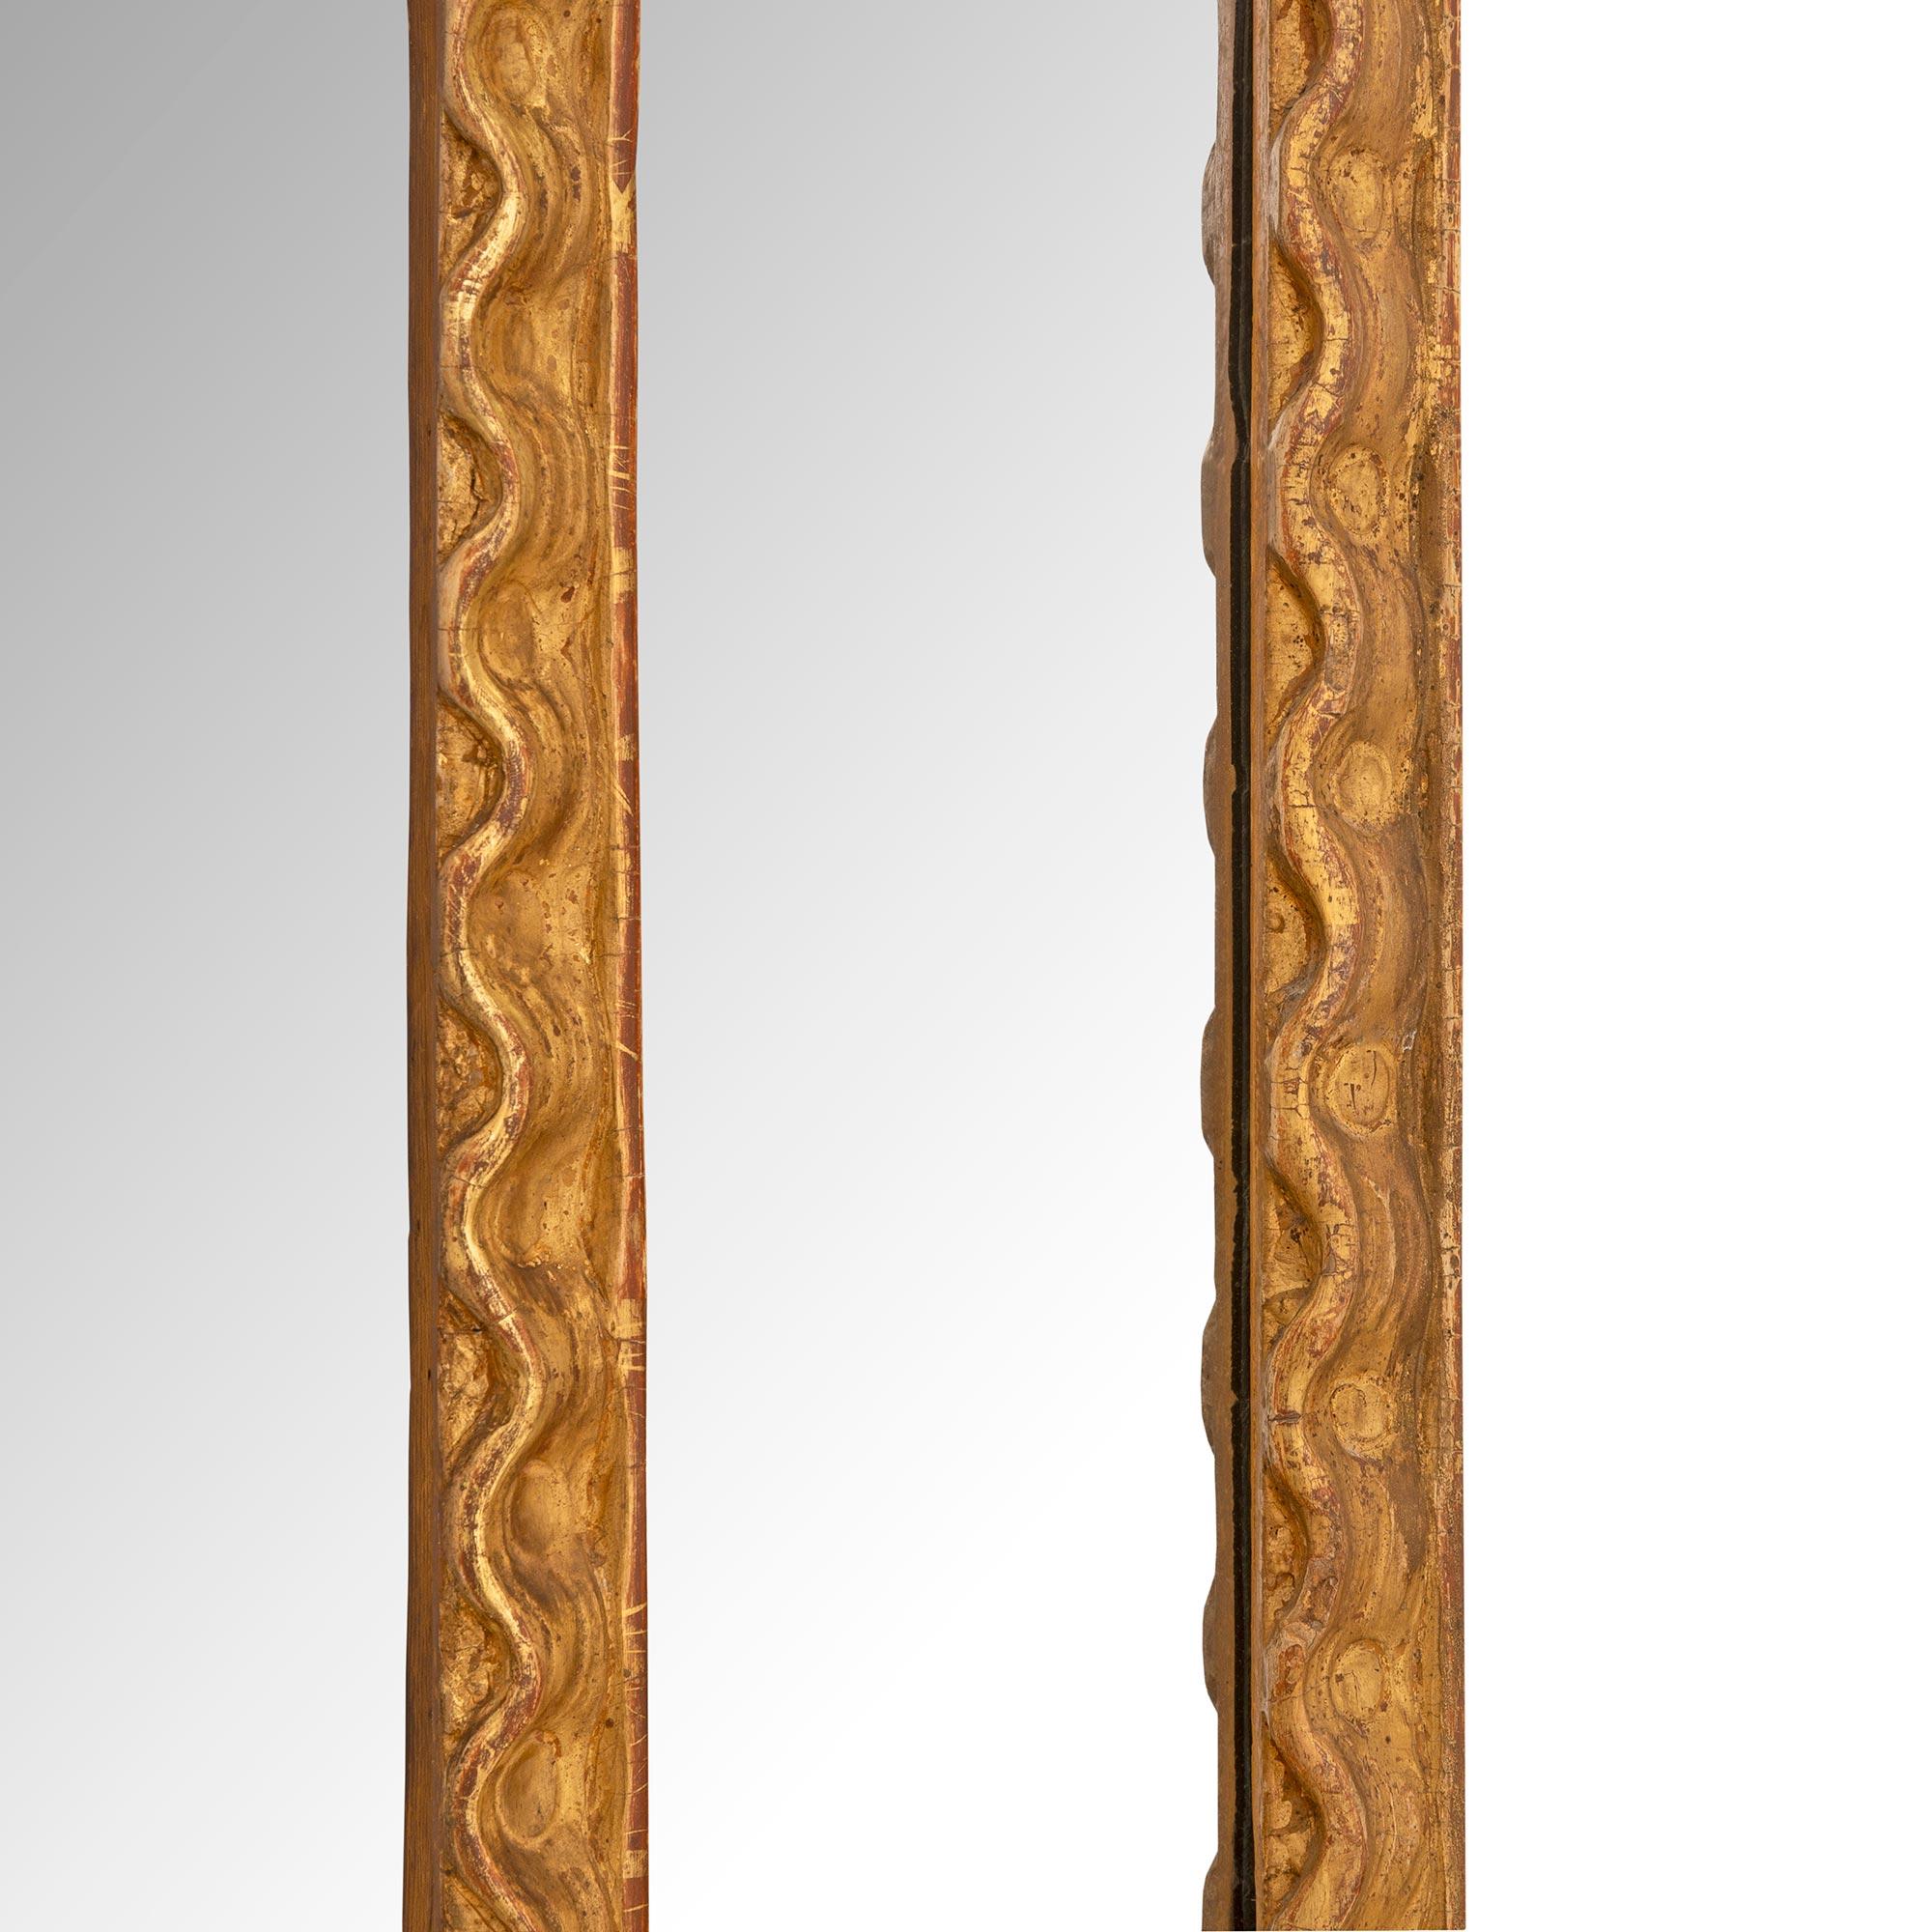 French 18th Century Regence Period Giltwood Mirror For Sale 2